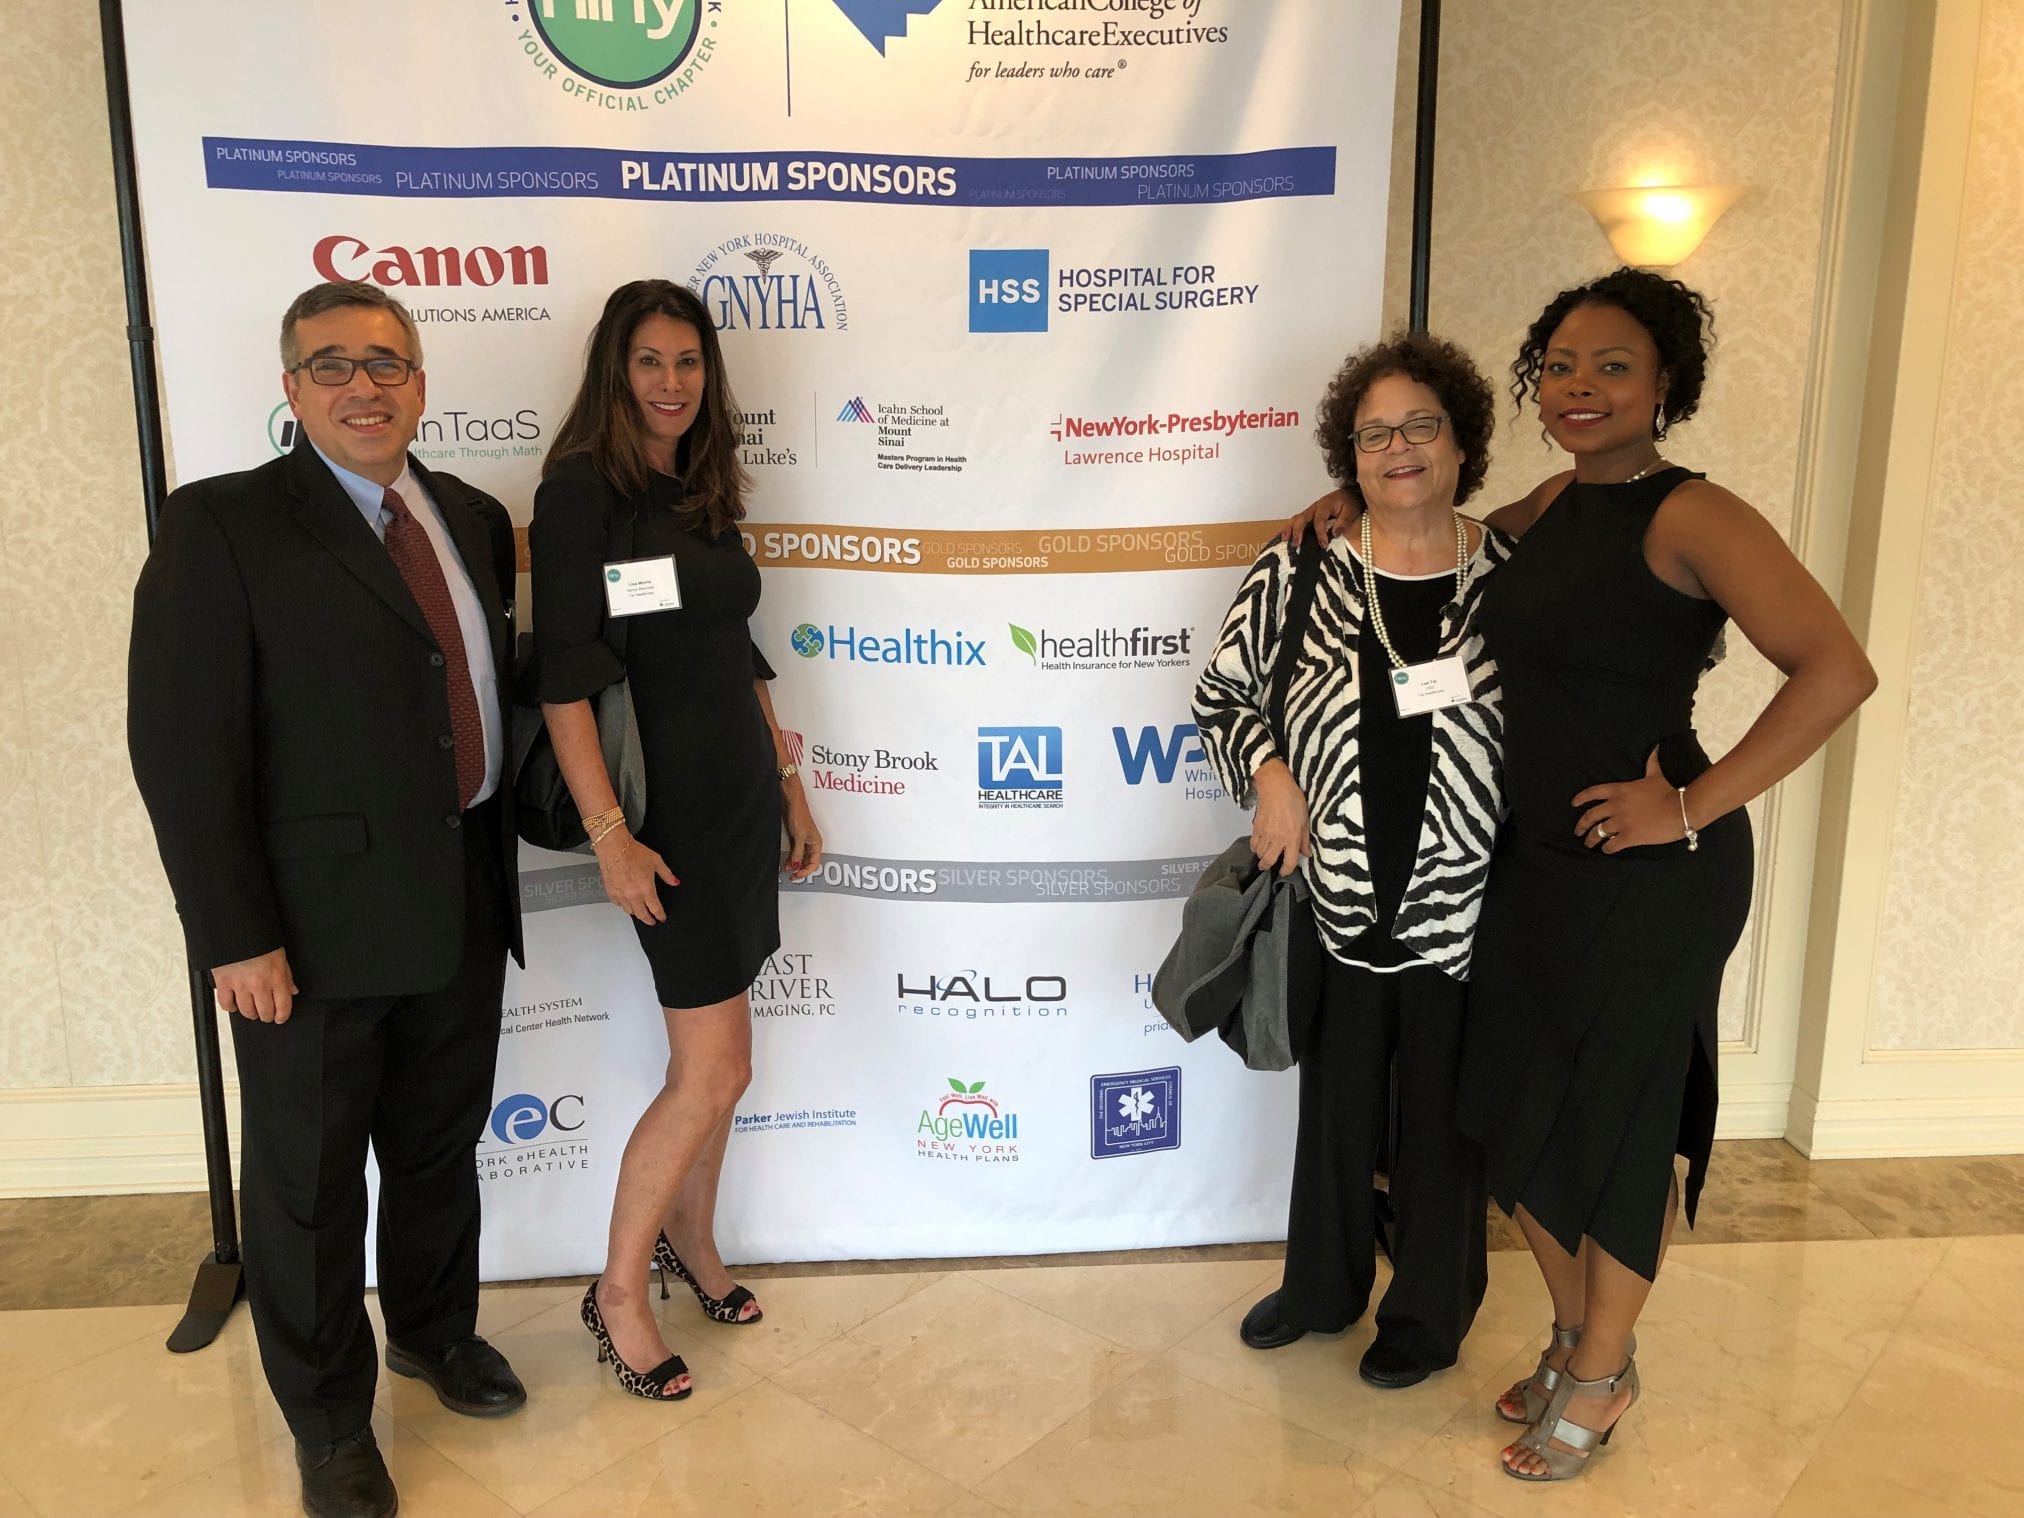 Trending at Tal: Tal Healthcare Attends HLNY 2019 Annual Gala